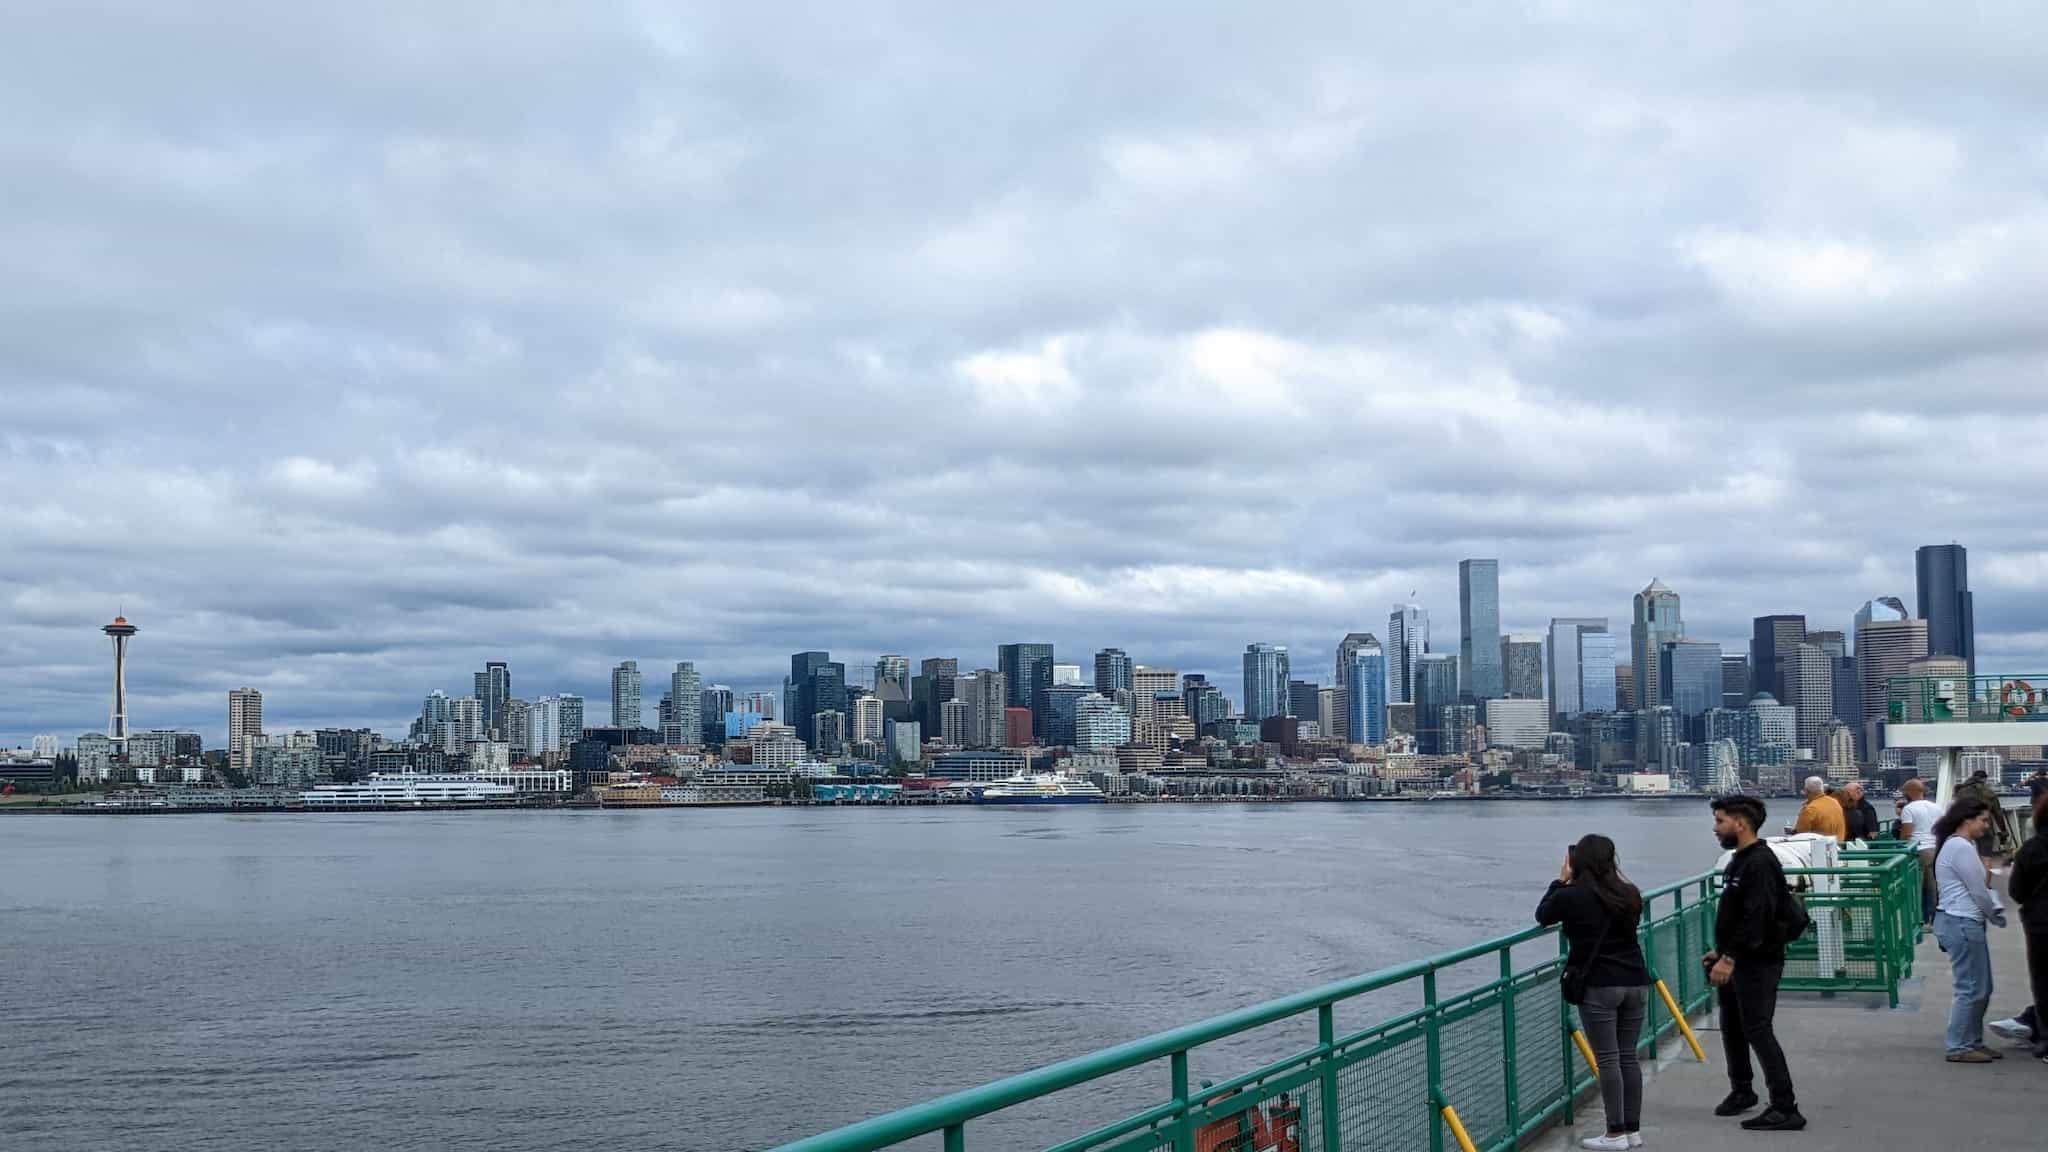 Seattle city skyline as seen from a ferry deck on a cloudy day